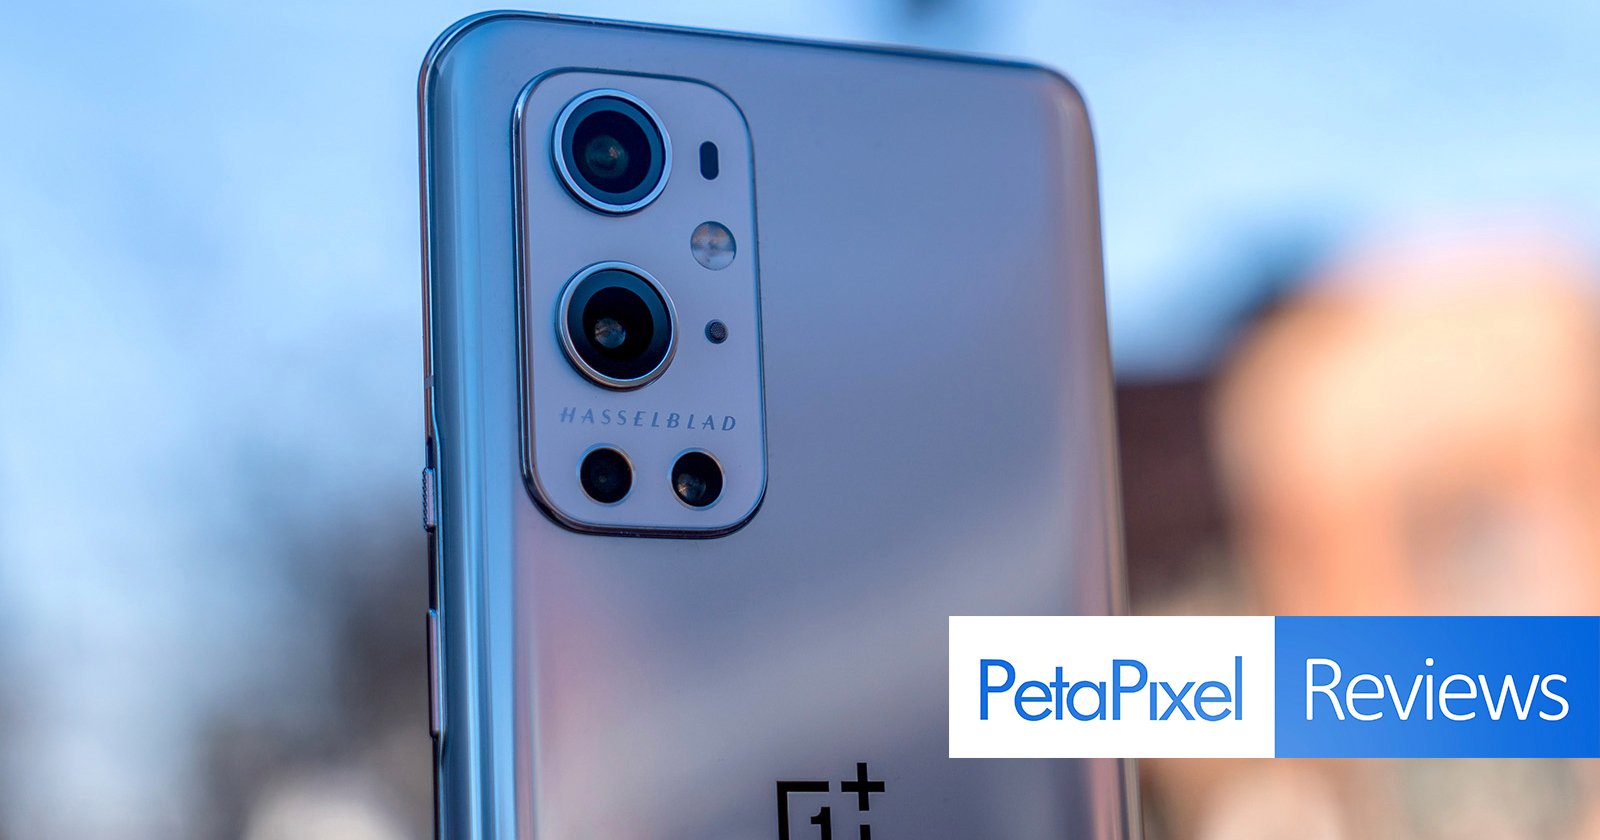 OnePlus 9 review: Super-fast charging, Hasselblad software, 120Hz display